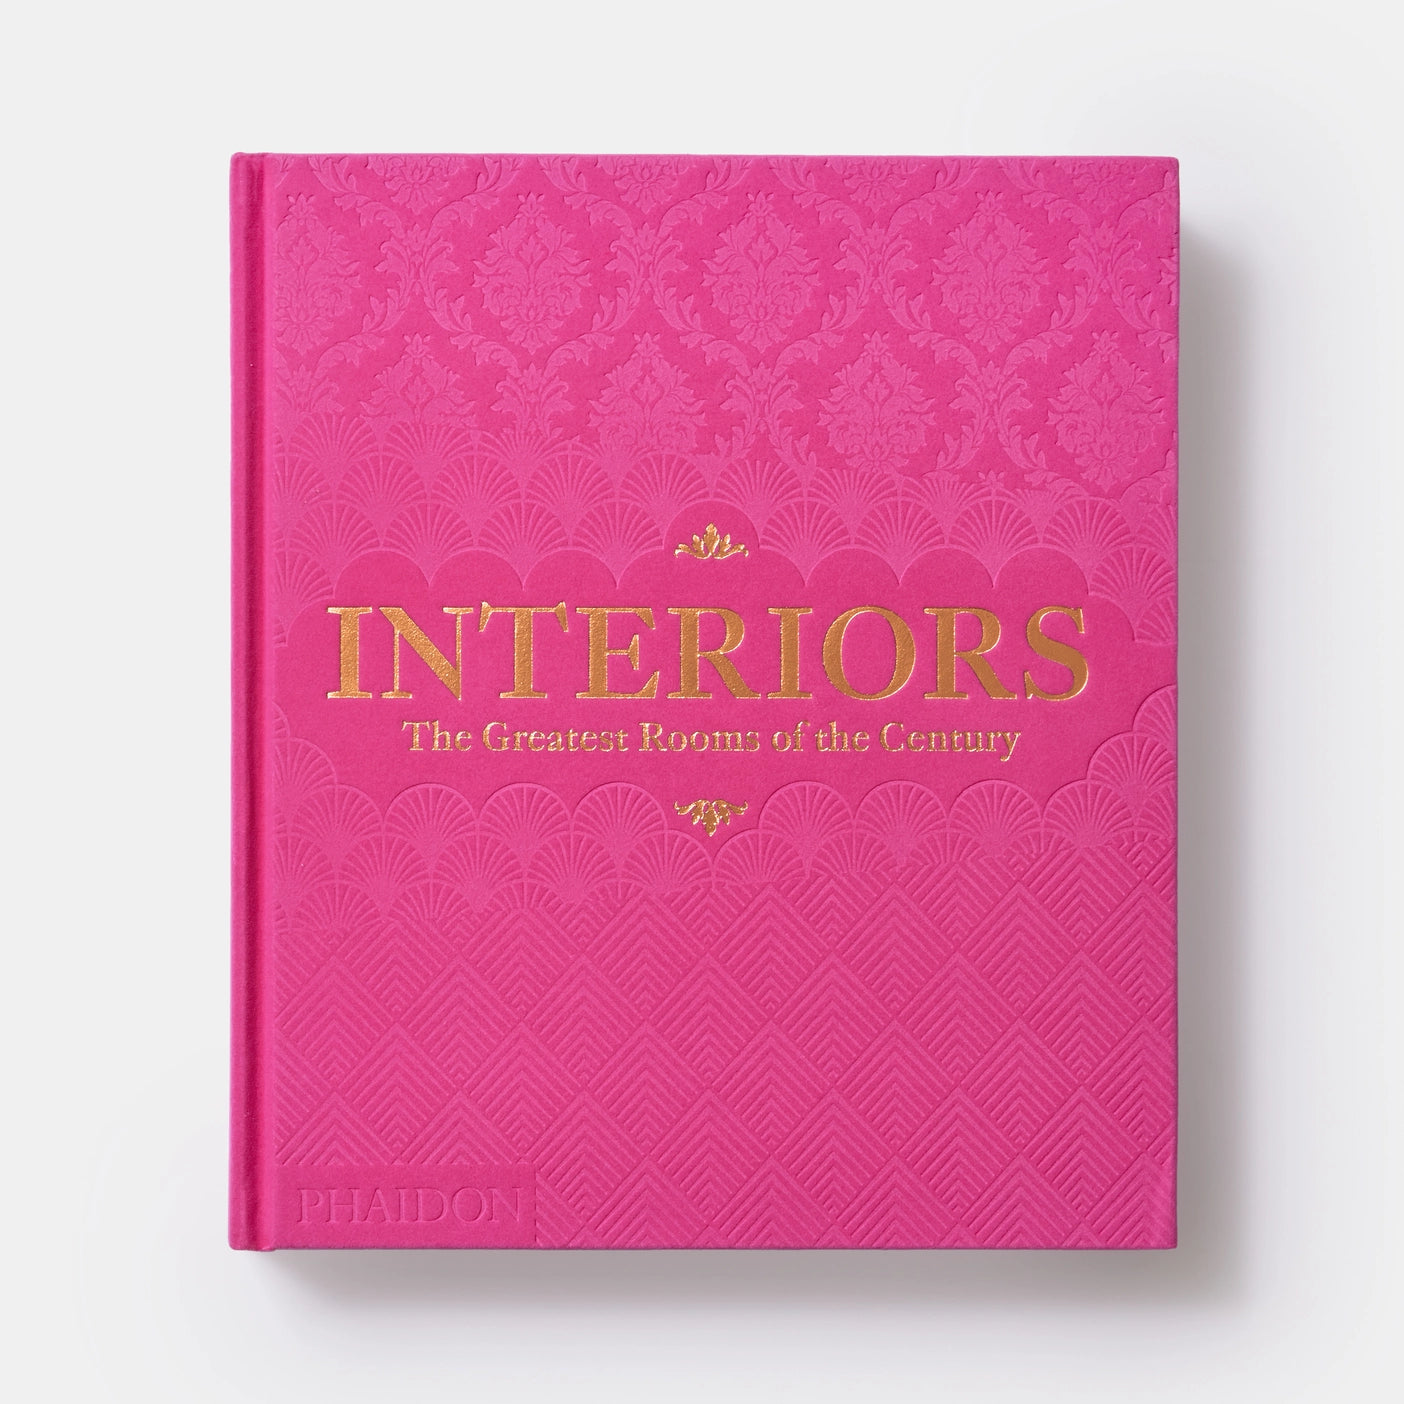 Interiors: The Greatest Rooms of the Century (Pink Edition) | Phaidon Editors, with an introduction by William Norwich